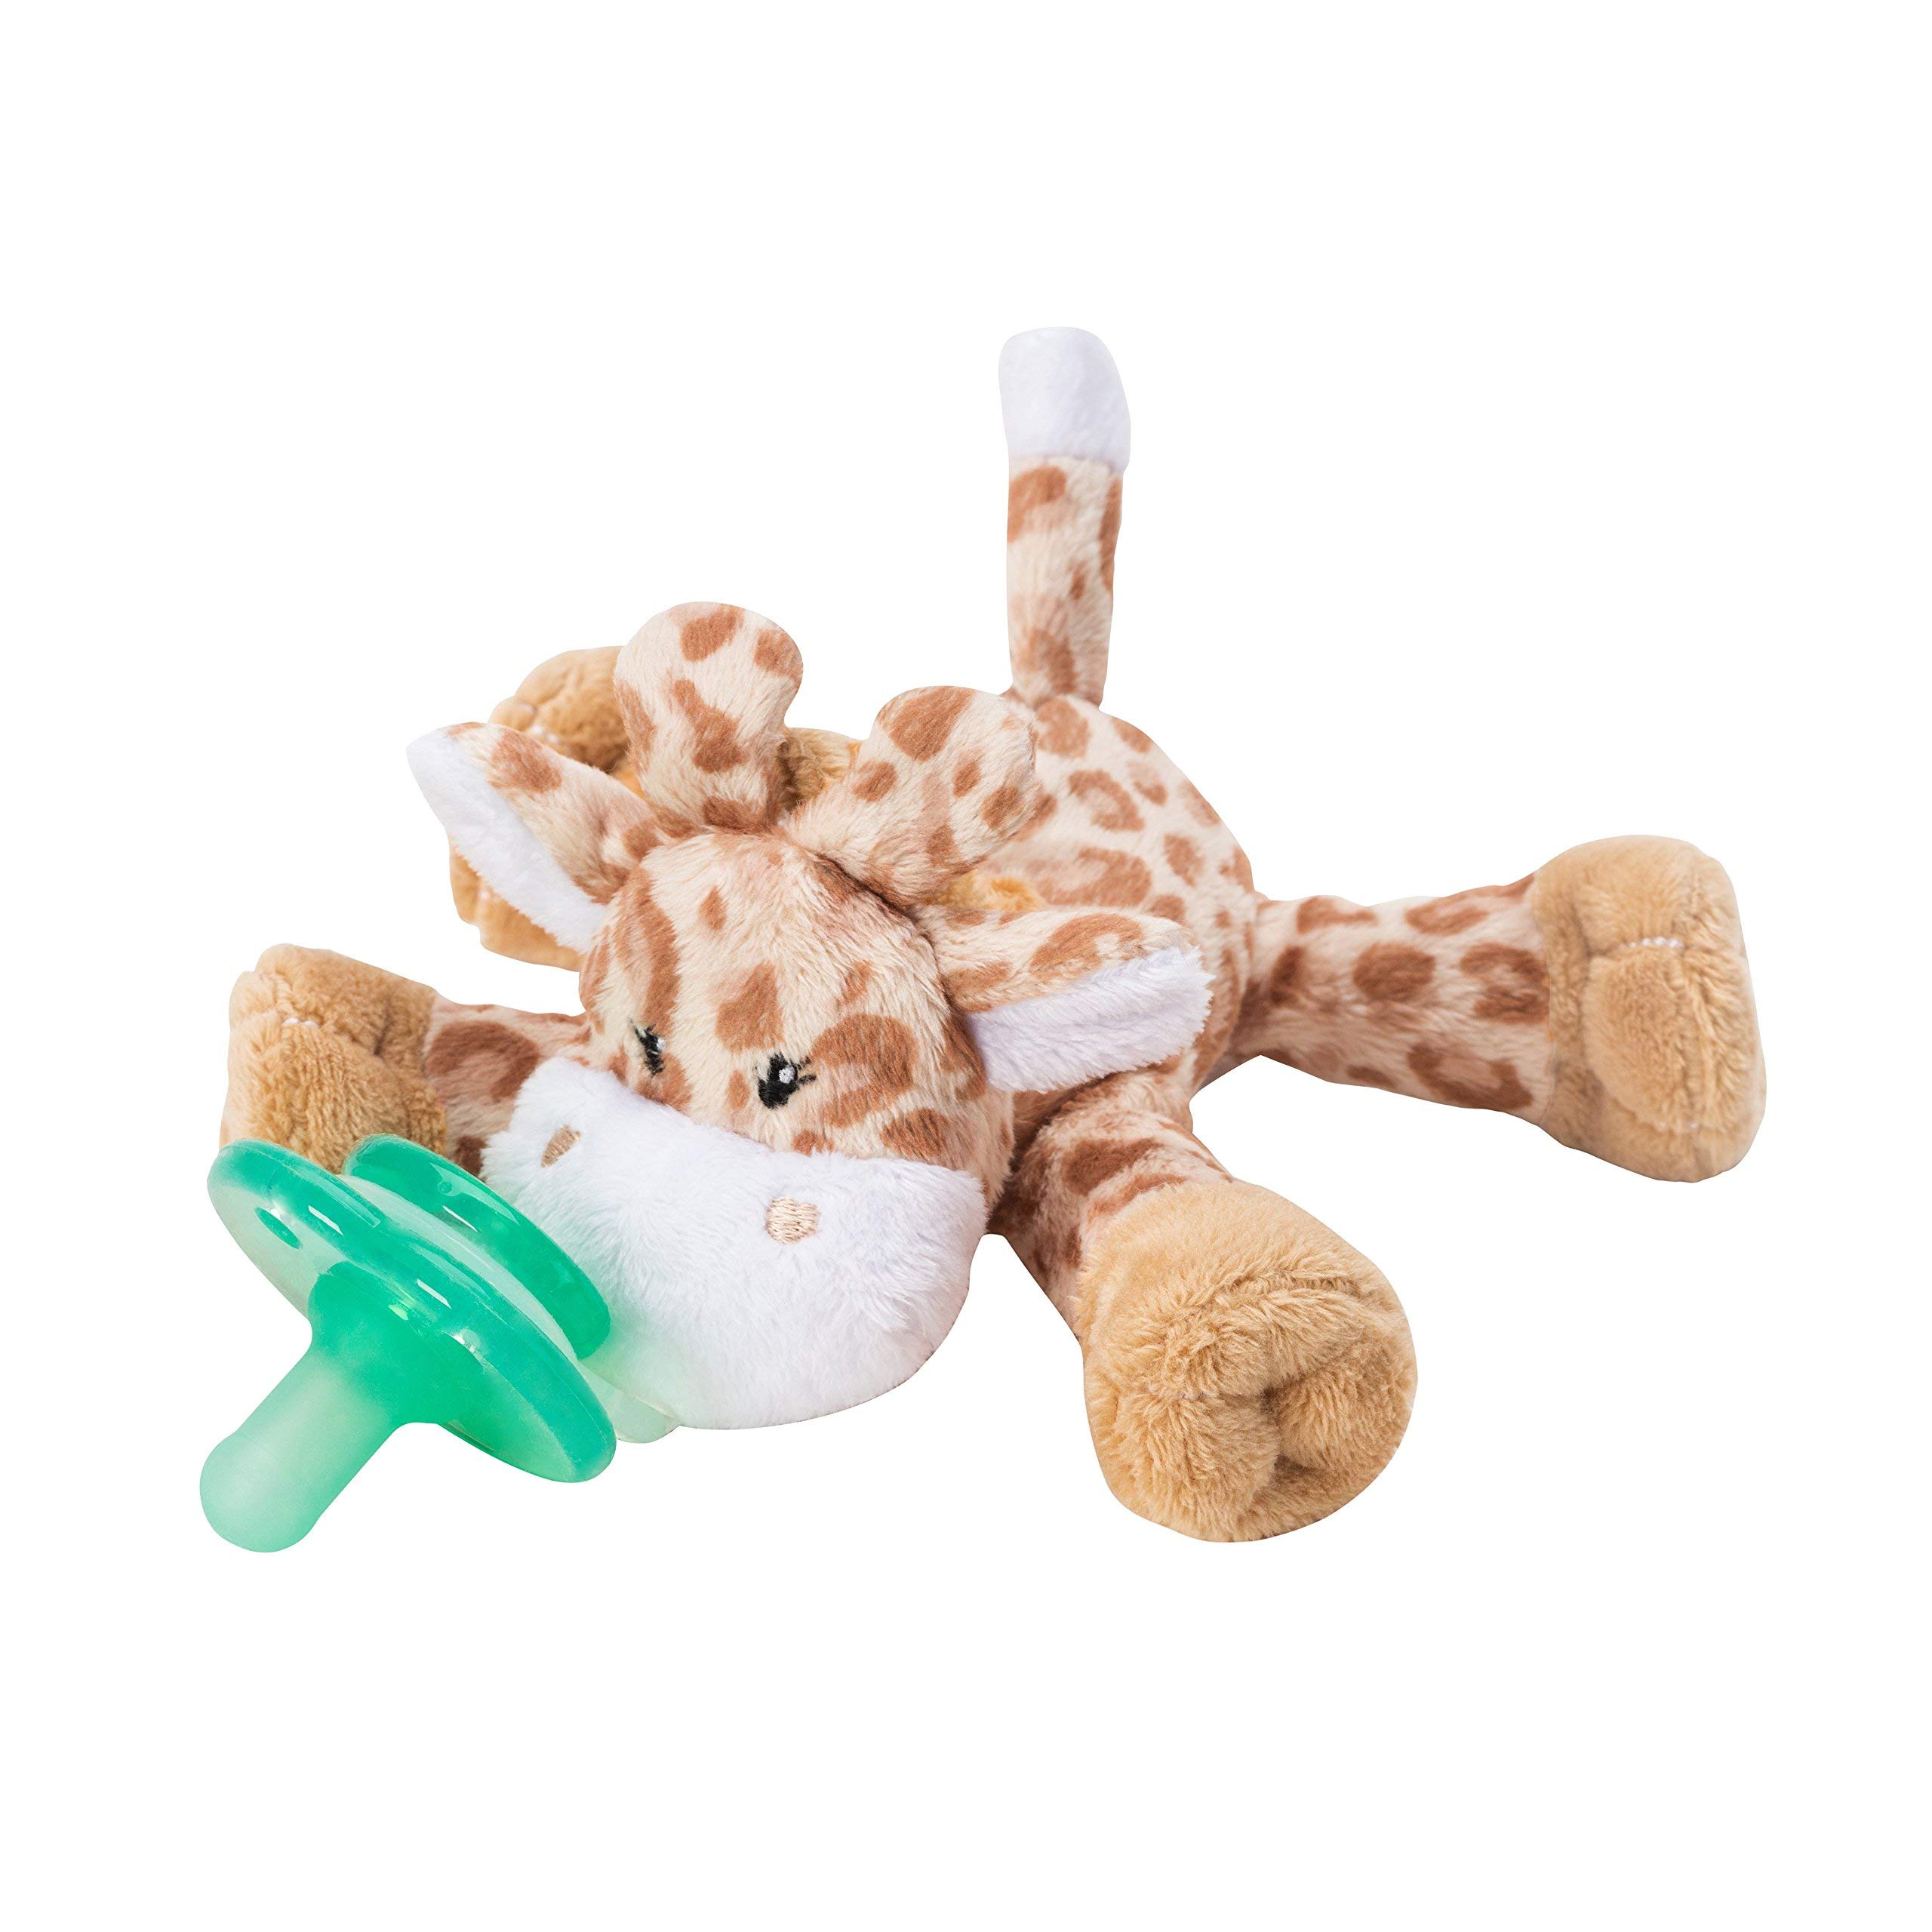 Book Cover Nookums Paci-Plushies Shakies - Pacifier Holder - Adapts to Name Brand Pacifiers, Suitable for All Ages, Plush Toy Includes Detachable Pacifier (Brown Giraffe) Georgie the Giaraffe